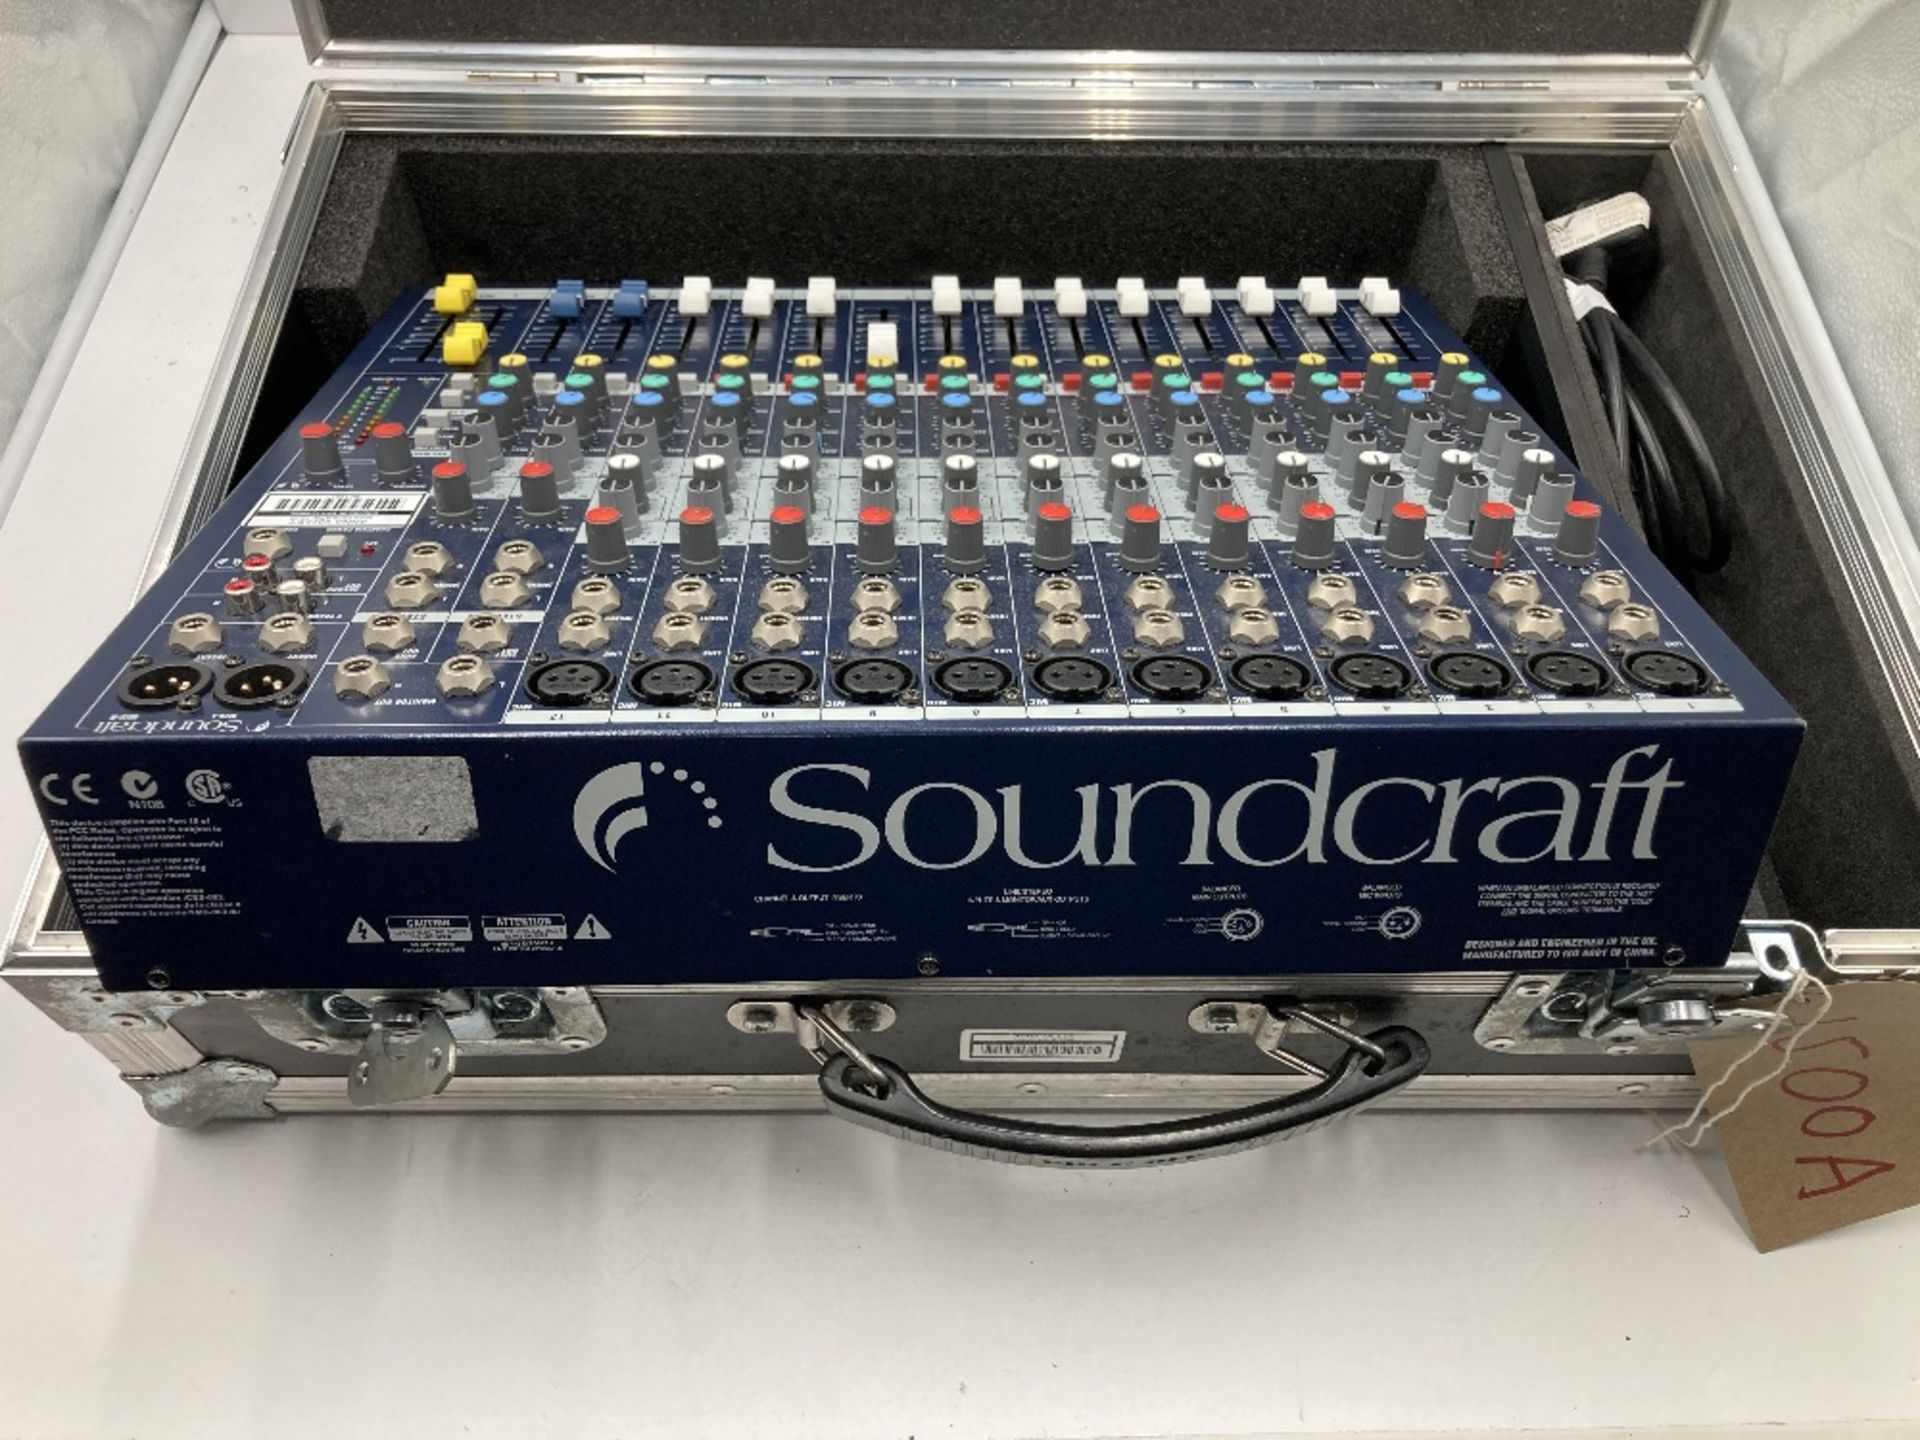 Soundcraft EFX12 (12ch) Analogue Mixing Console & Heavy Duty Briefcase - Image 6 of 11